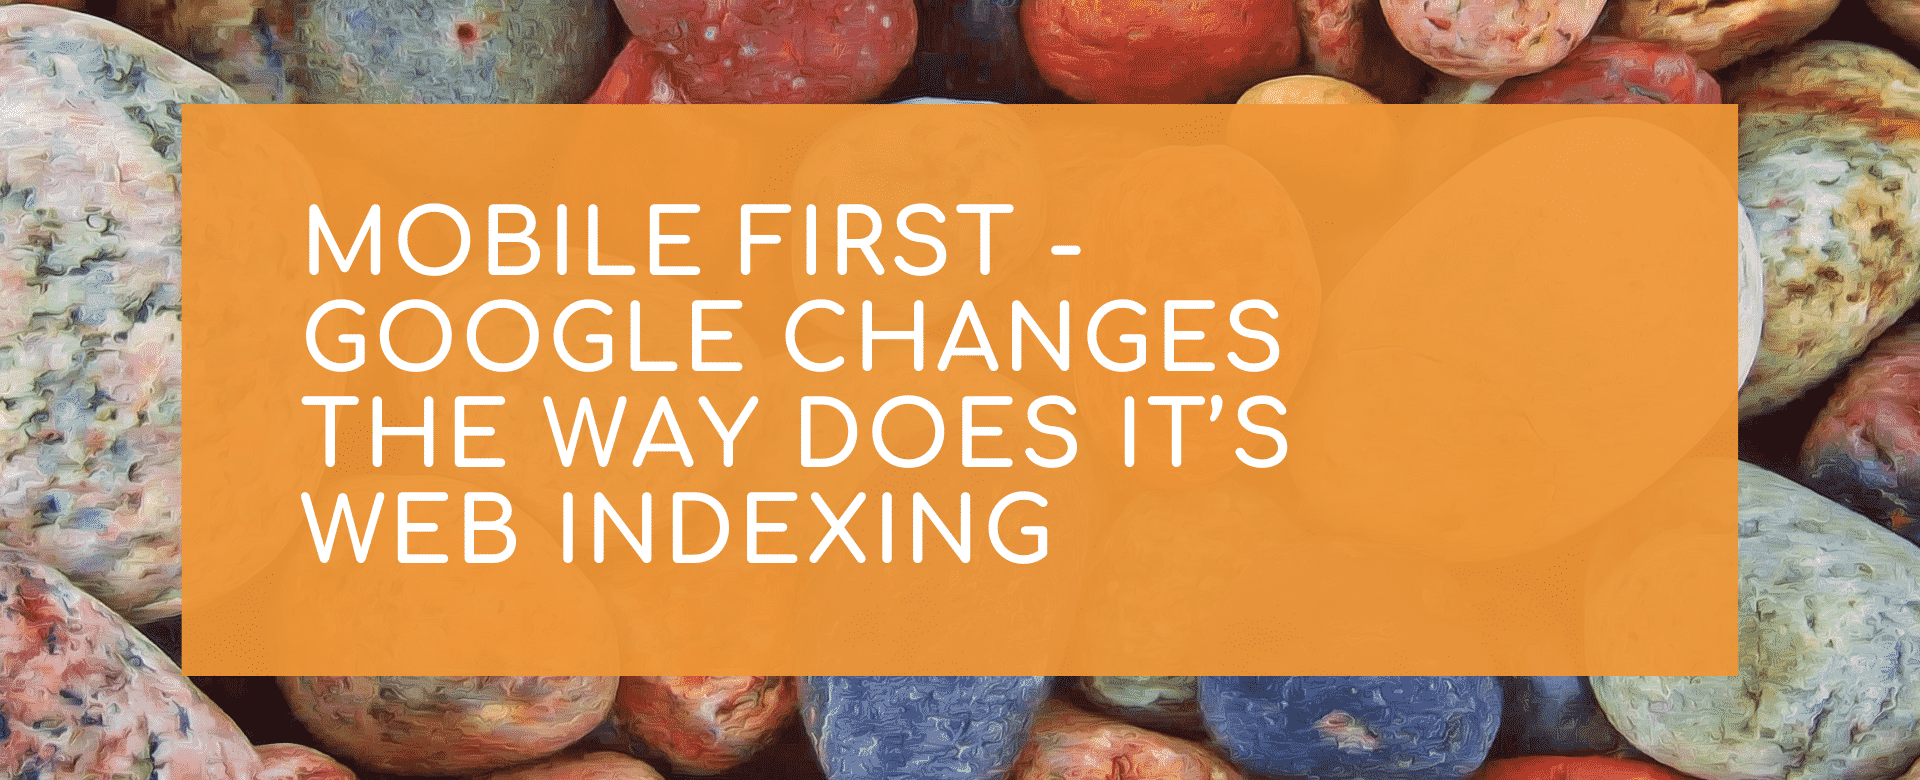 Mobile first - Google changes the way does it’s web indexing